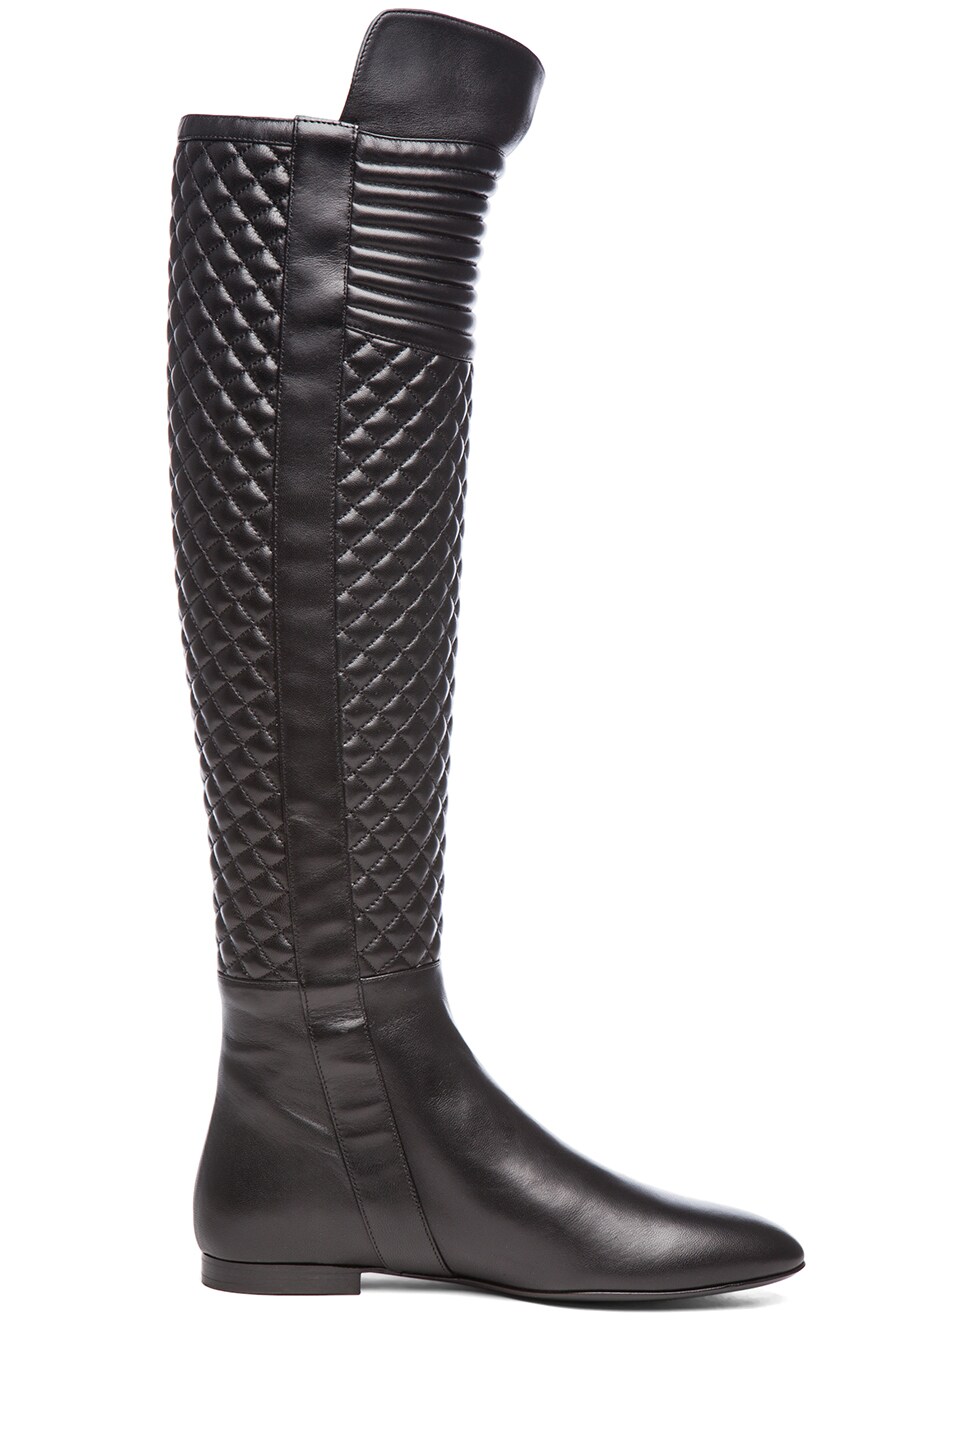 Brian Atwood Ares Nappa Leather Boot in Black Leather | FWRD